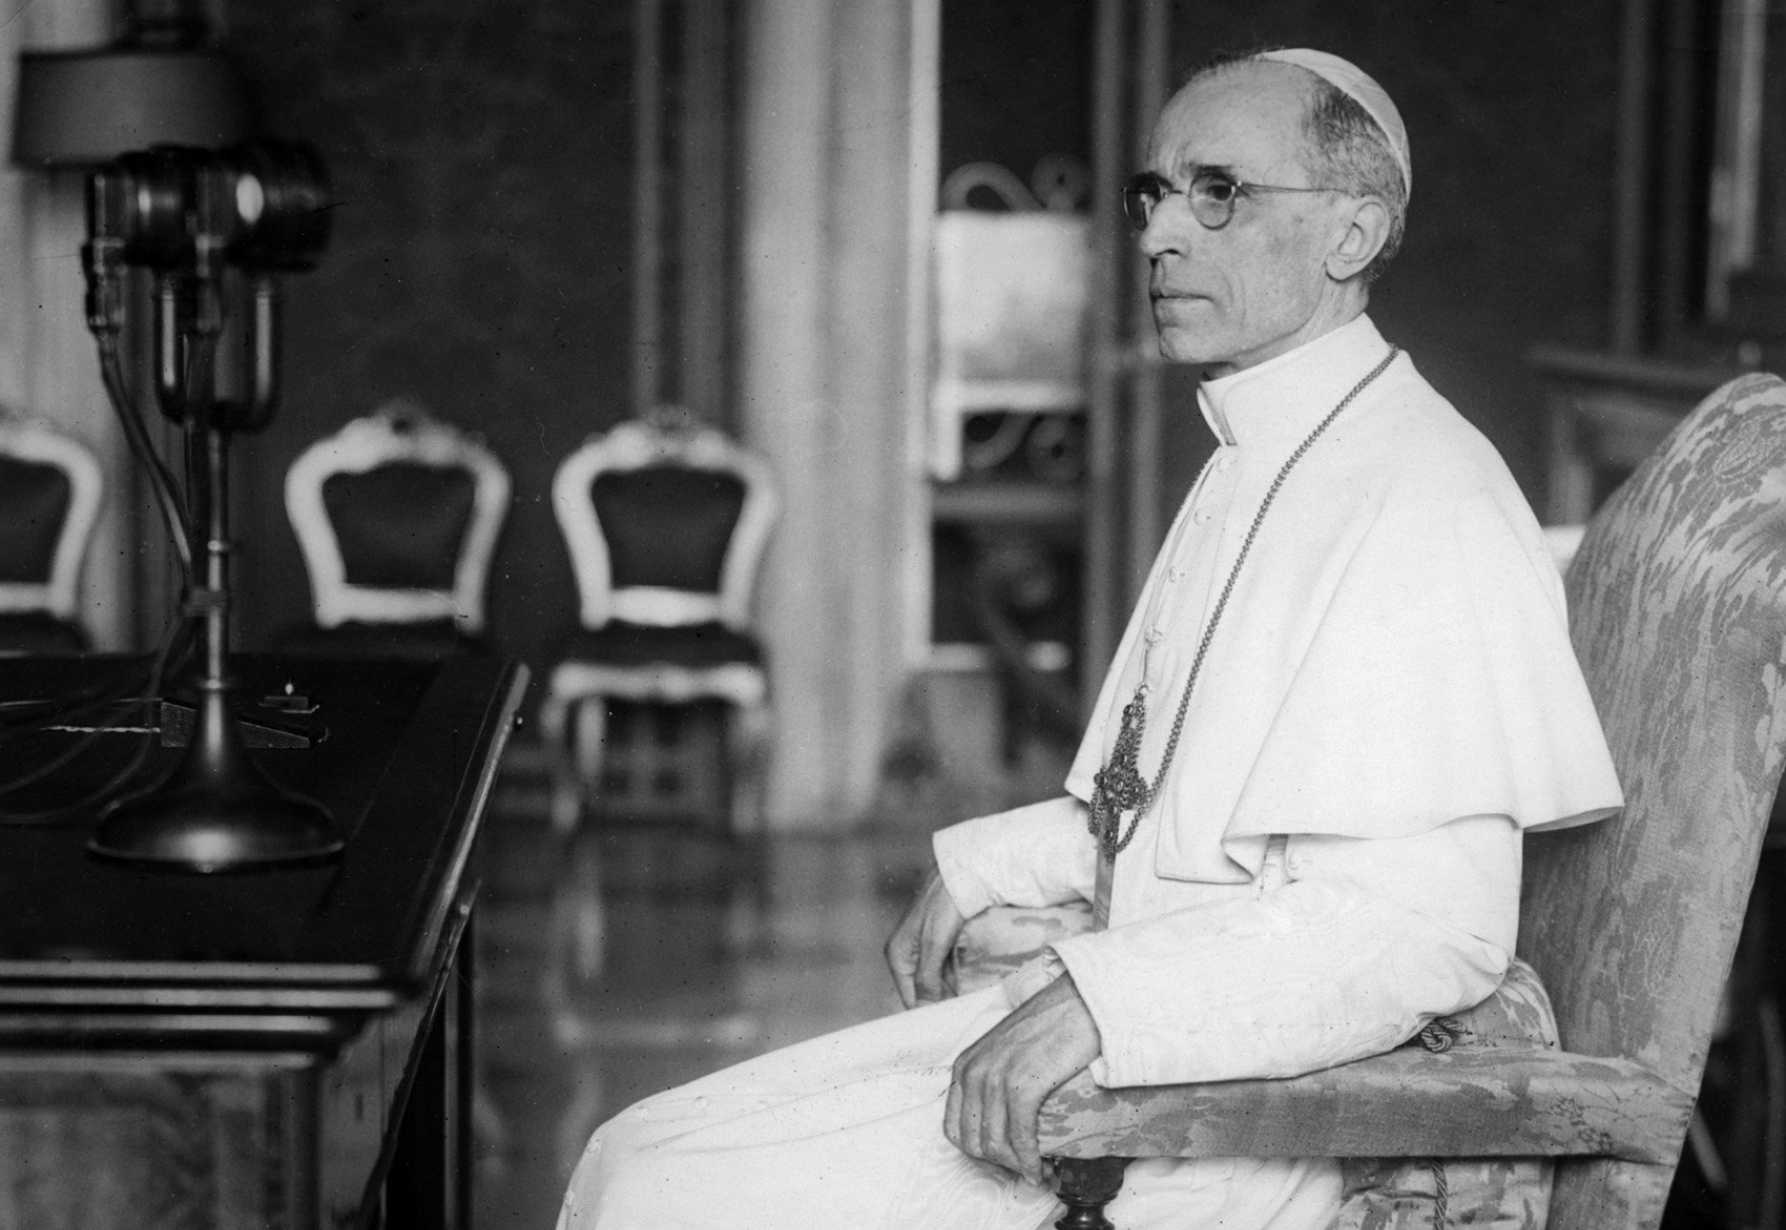 Pious protector: After 80 years, a pope is remembered for saving Rome